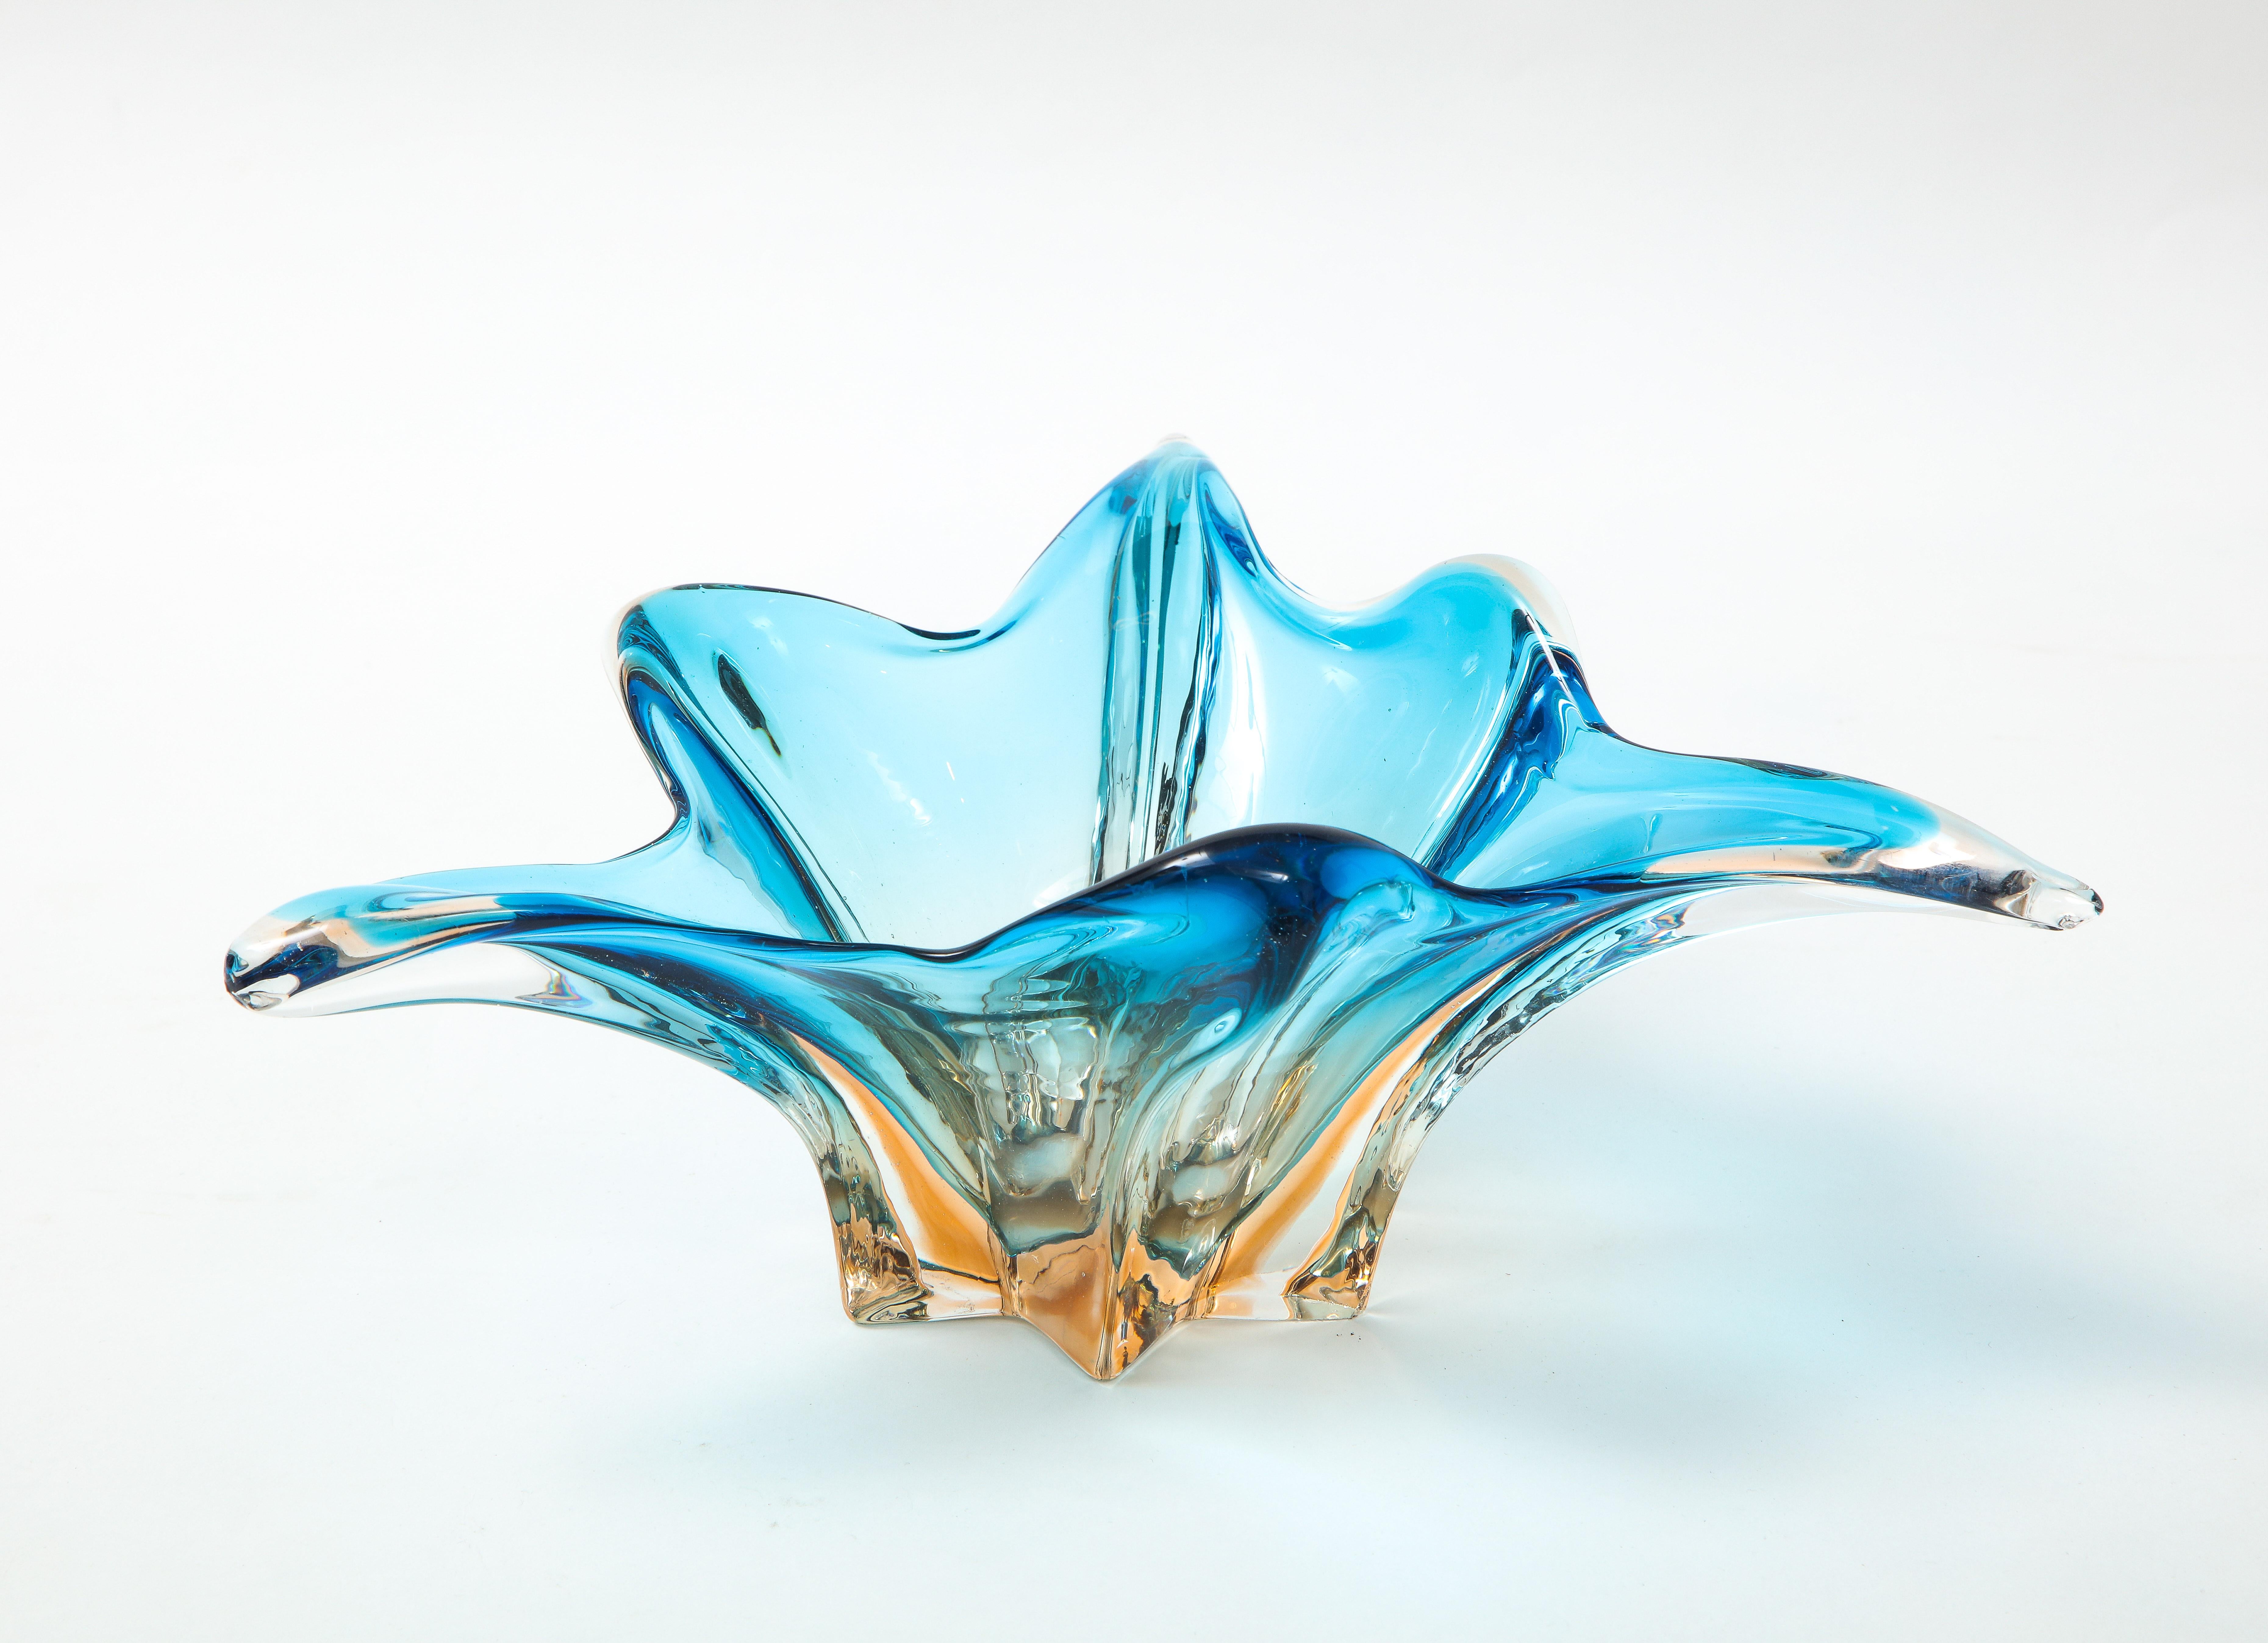 Eye catching Murano glass vessel in vibrant sky blue and orange tones.